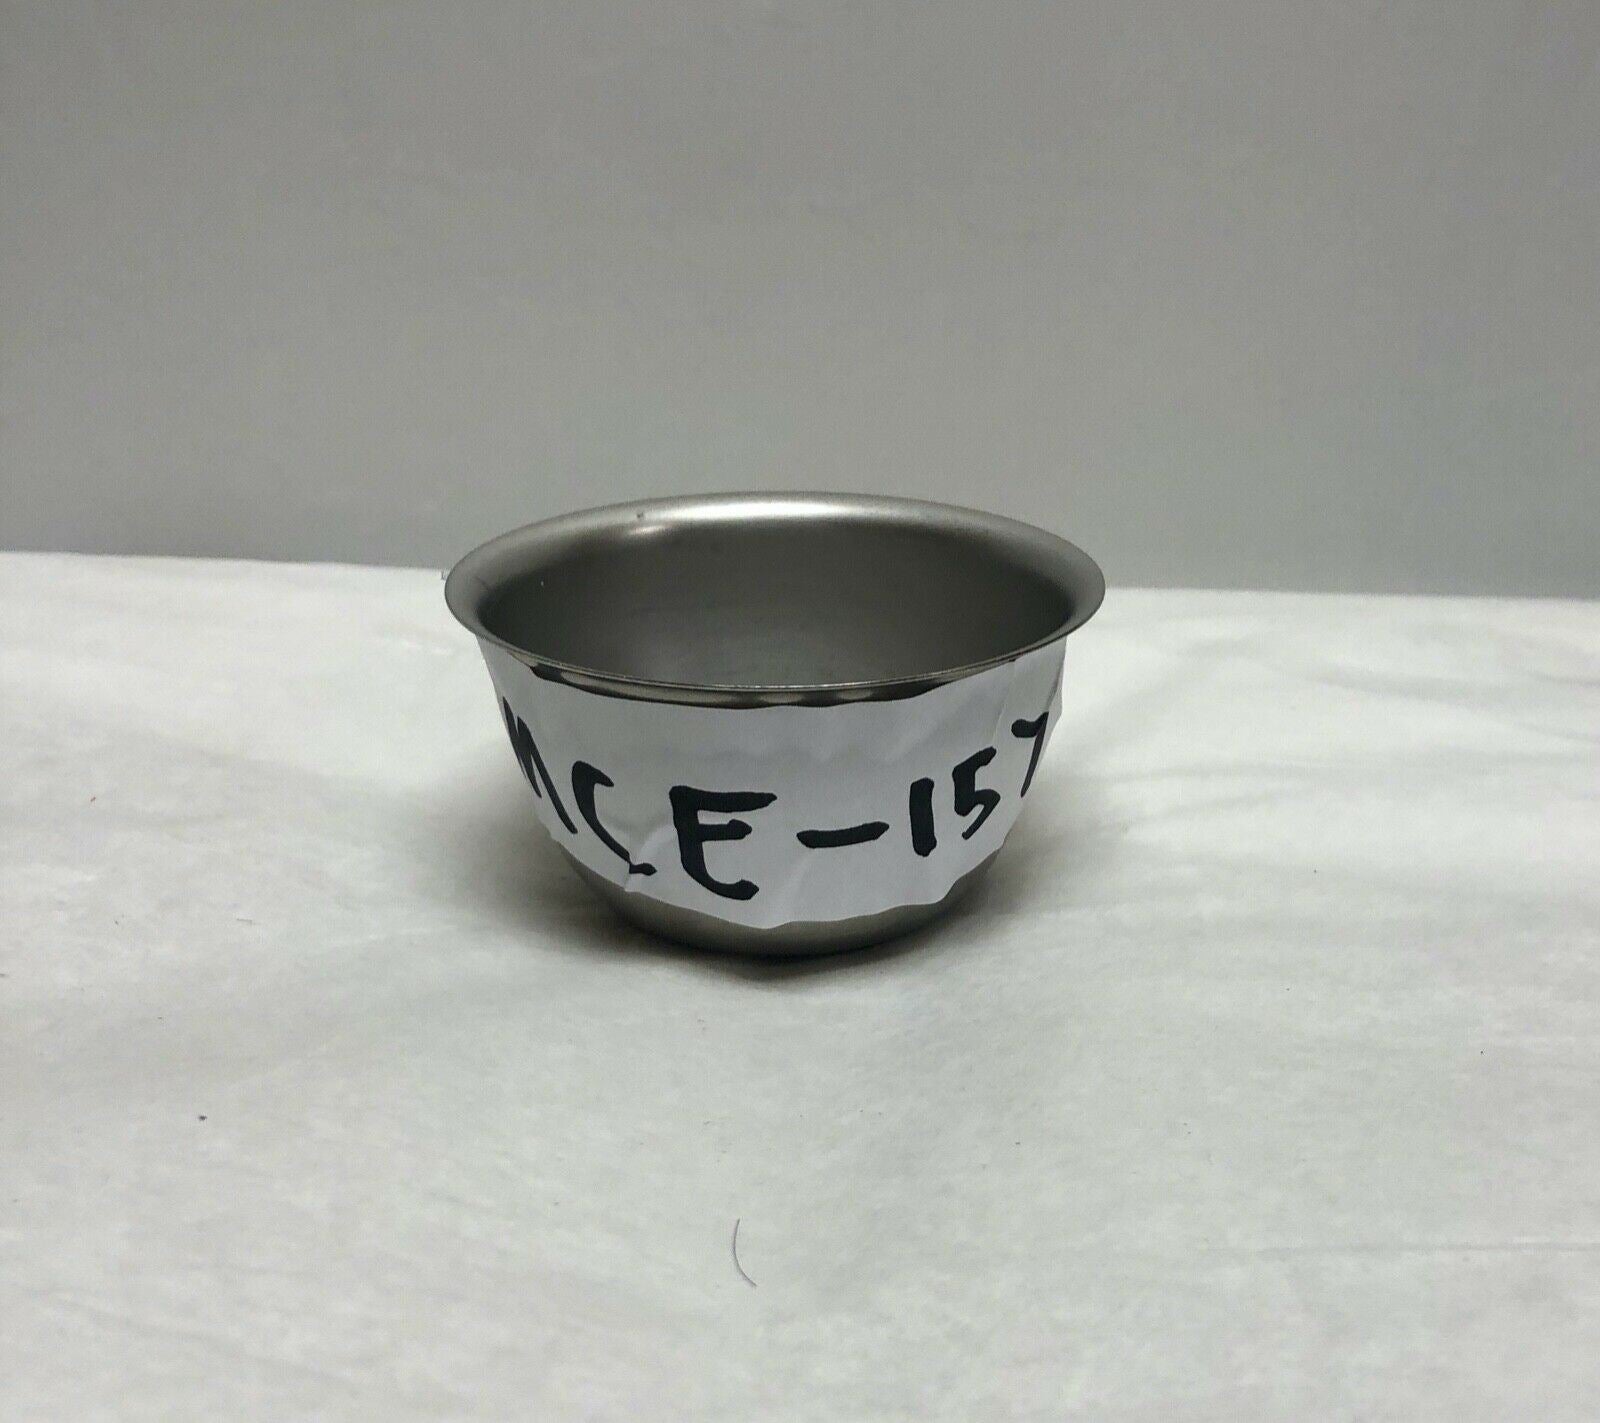 Unbranded Steel Bowl (C: 3 1/4in. H: 2 in.) | KMCE-157 DIAGNOSTIC ULTRASOUND MACHINES FOR SALE